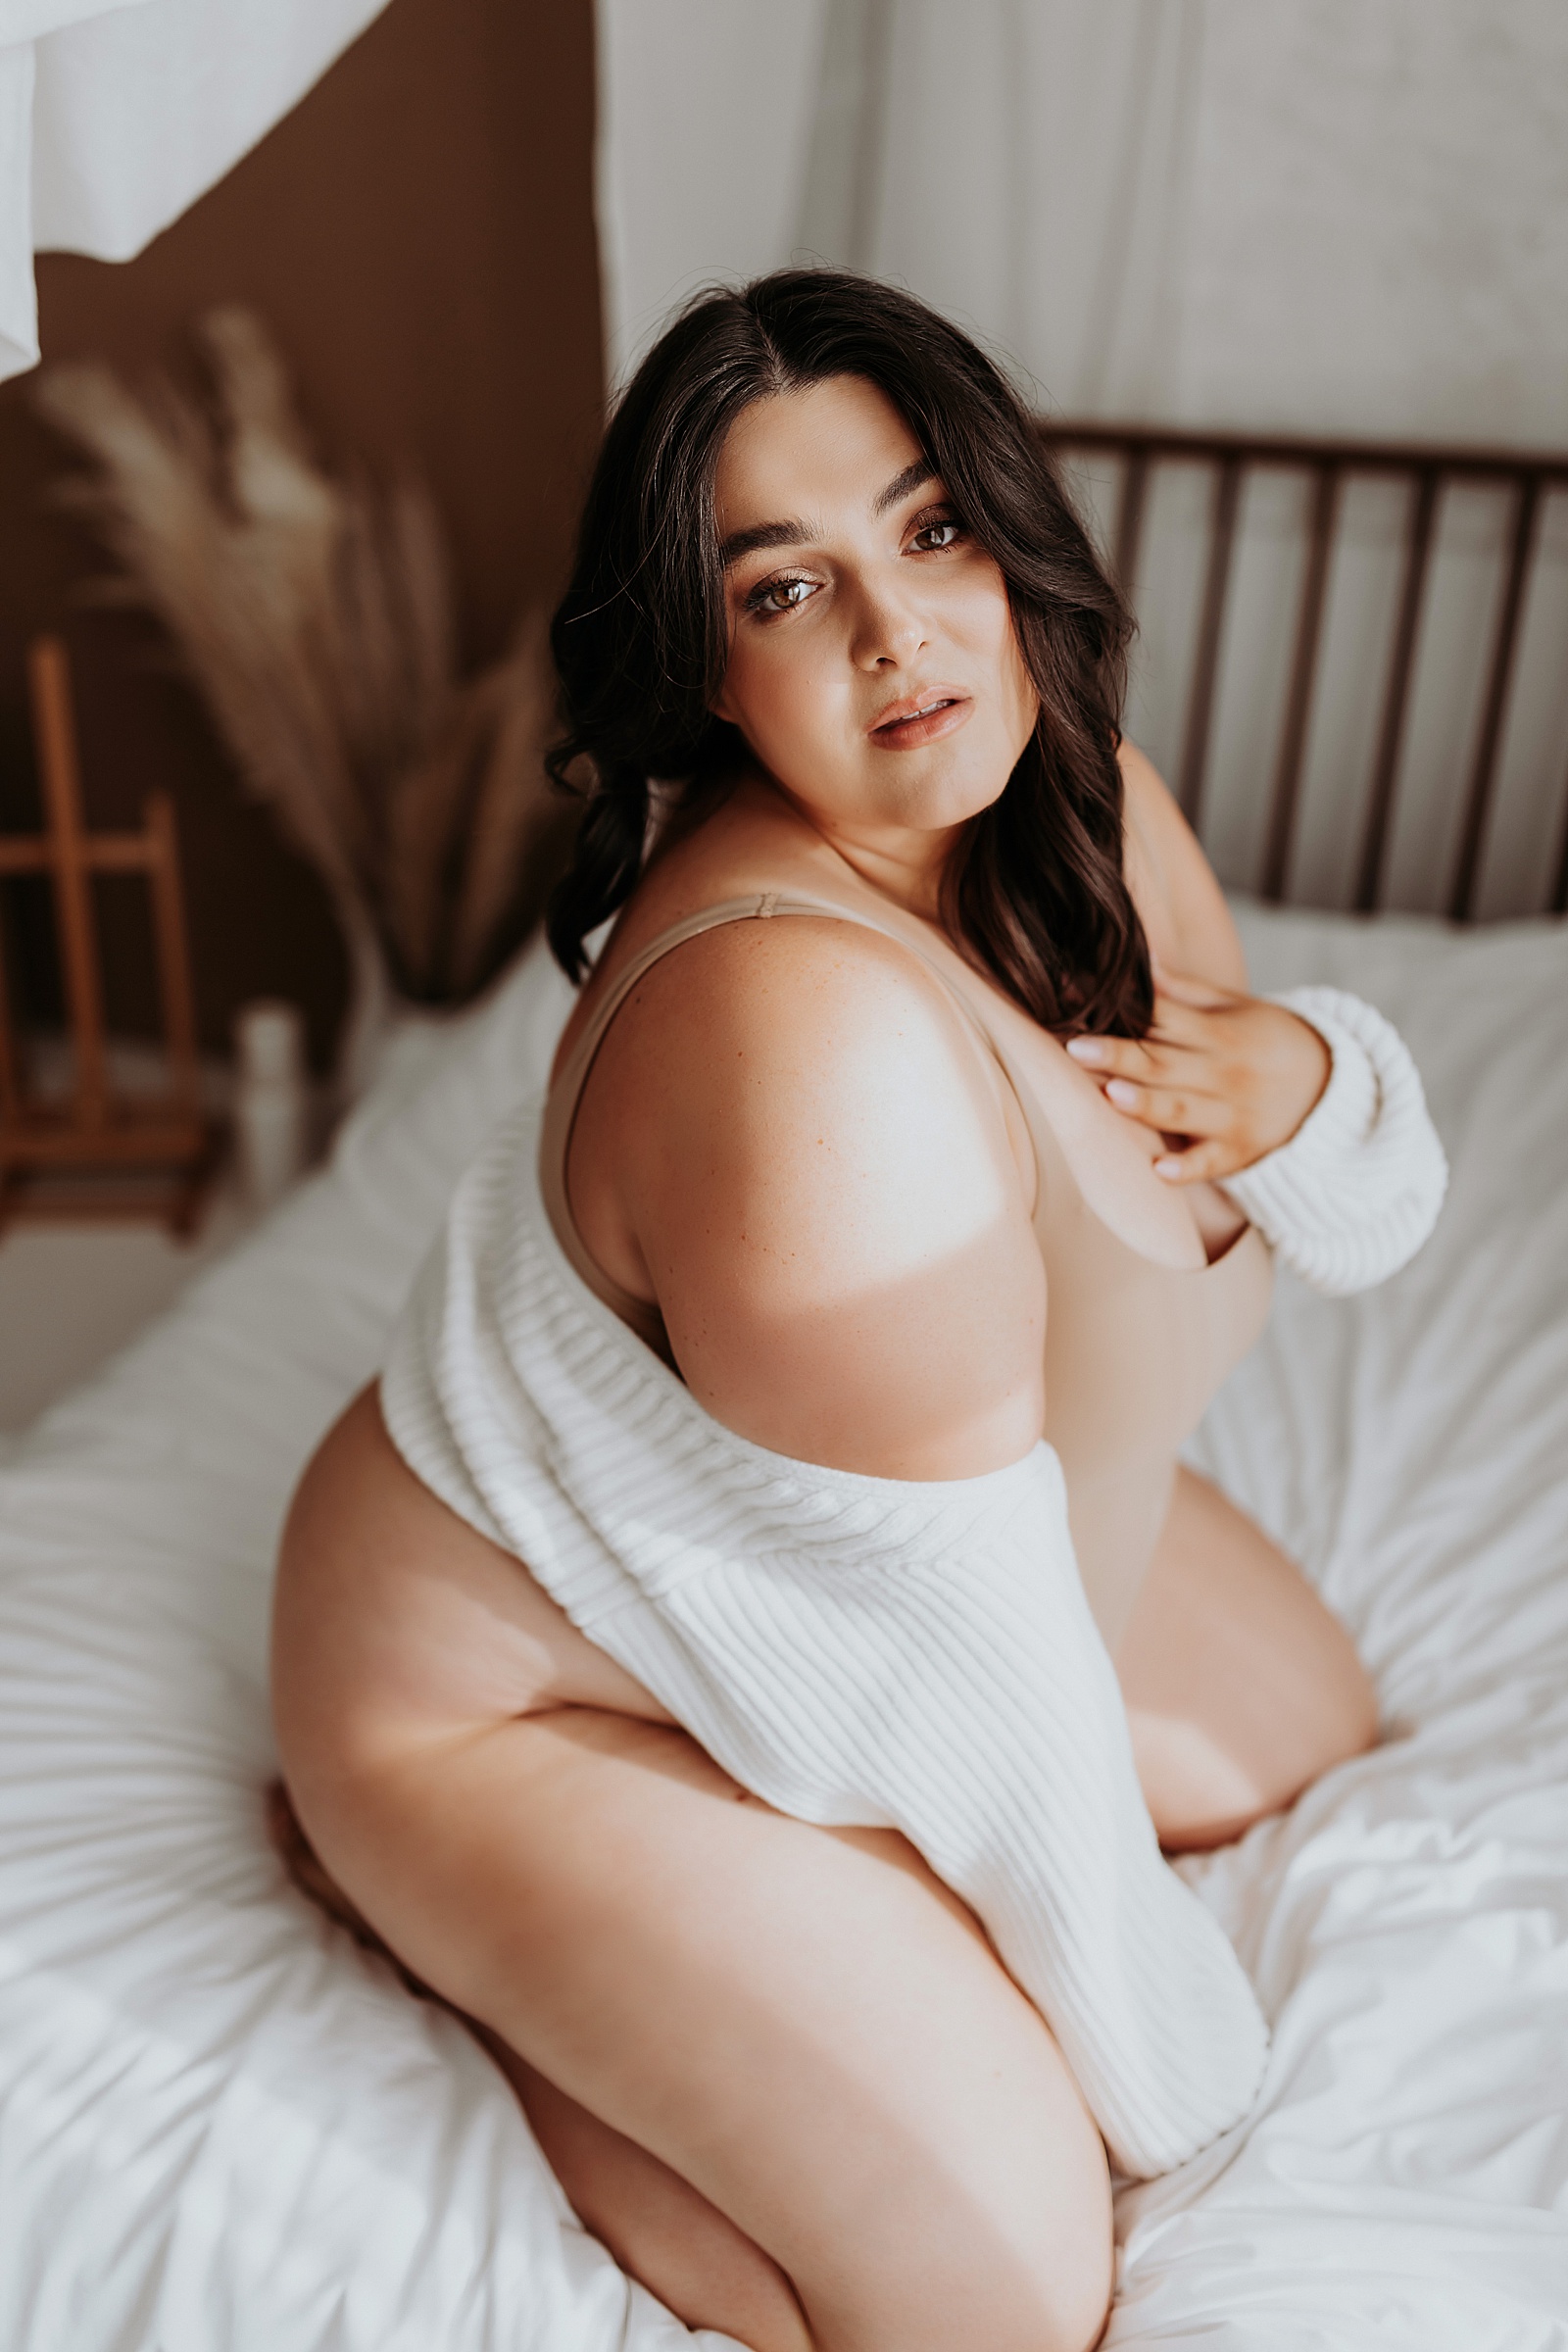 Brunette woman in nude lingerie and white sweater by Minneapolis boudoir photographer